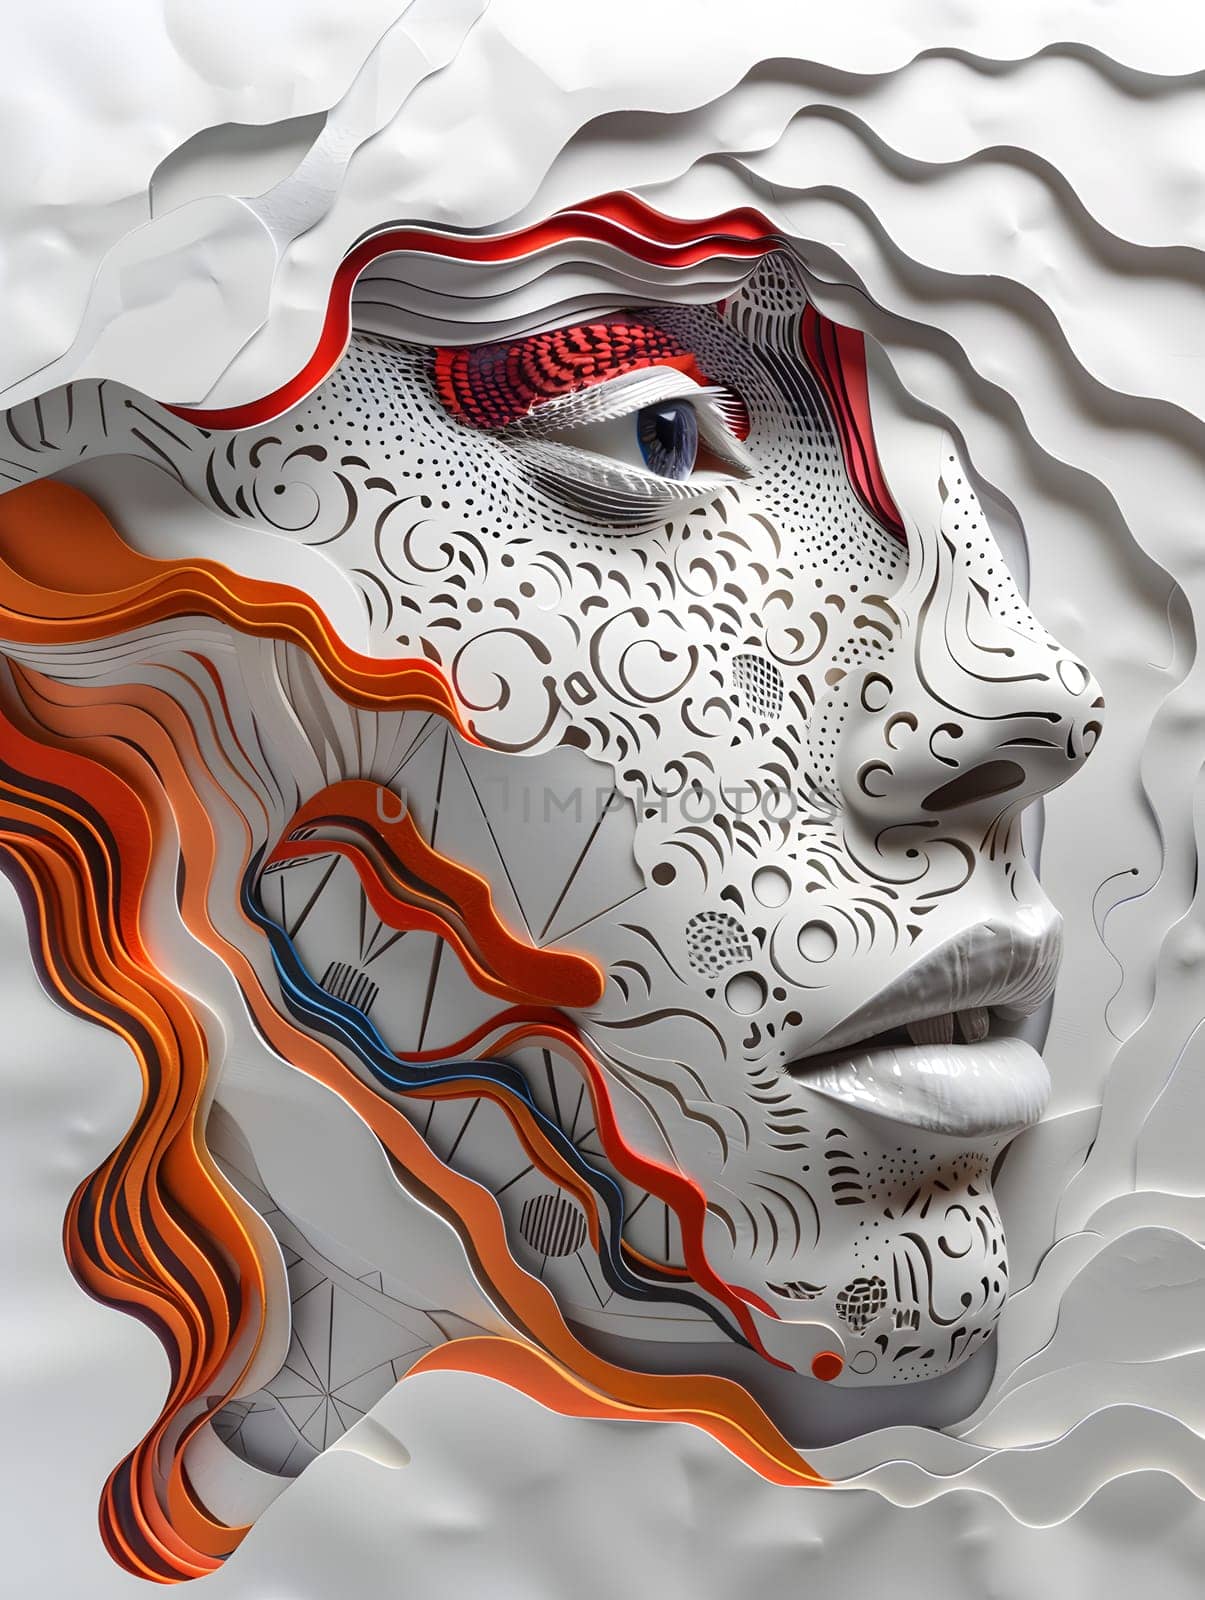 A sculpture depicting a womans face with intricate patterns by Nadtochiy